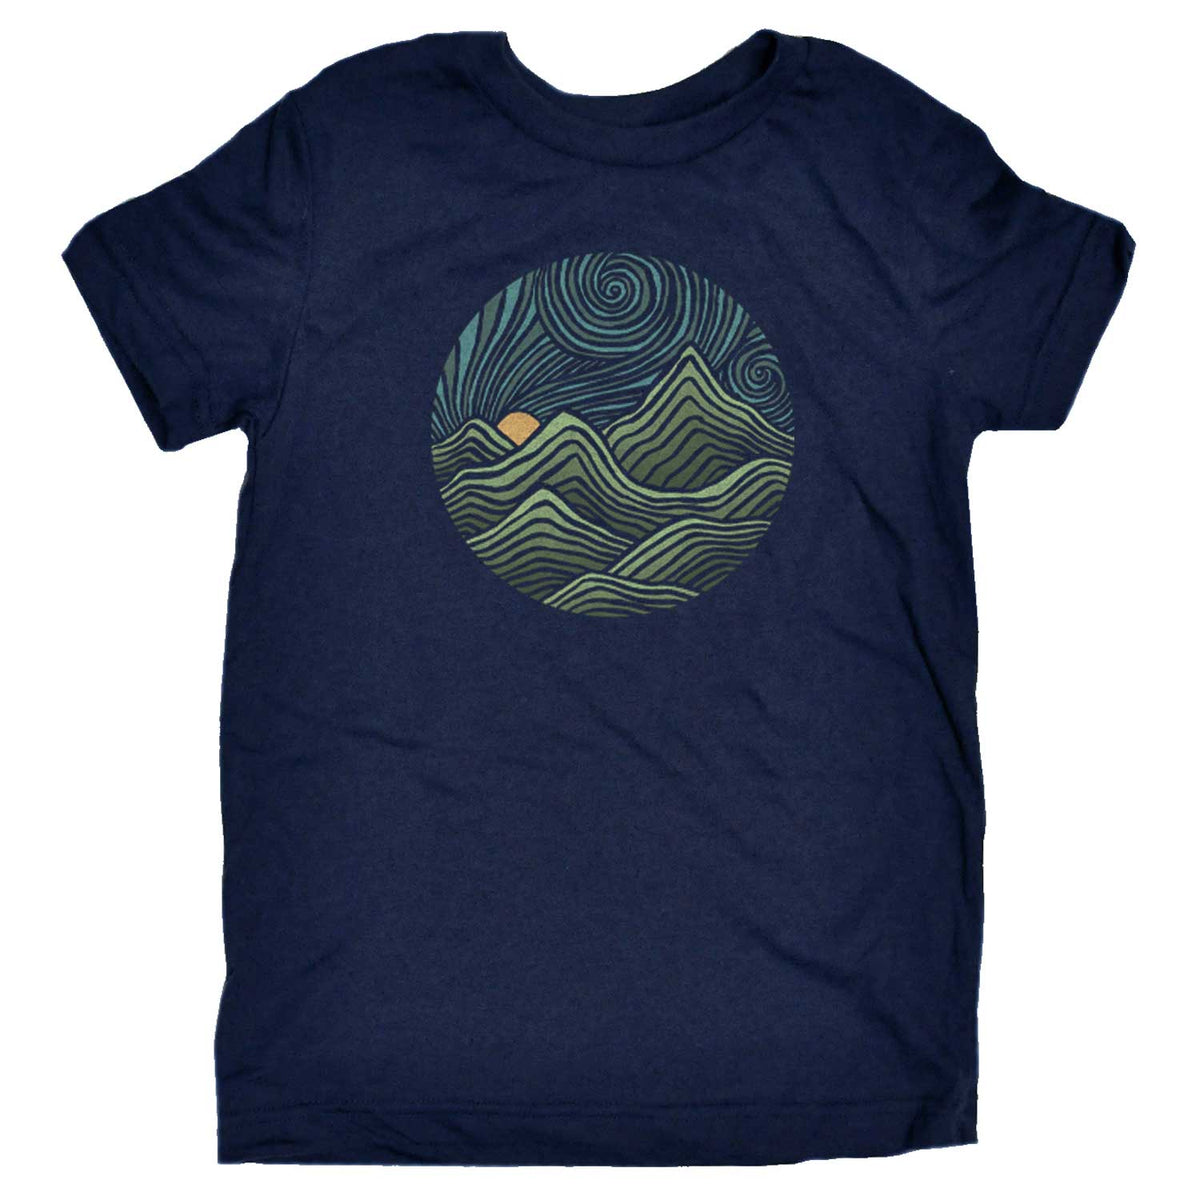 Kids Swirly Mountains Cool Nature Graphic T-Shirt | Retro Artsy Hippie Tee | Solid Threads